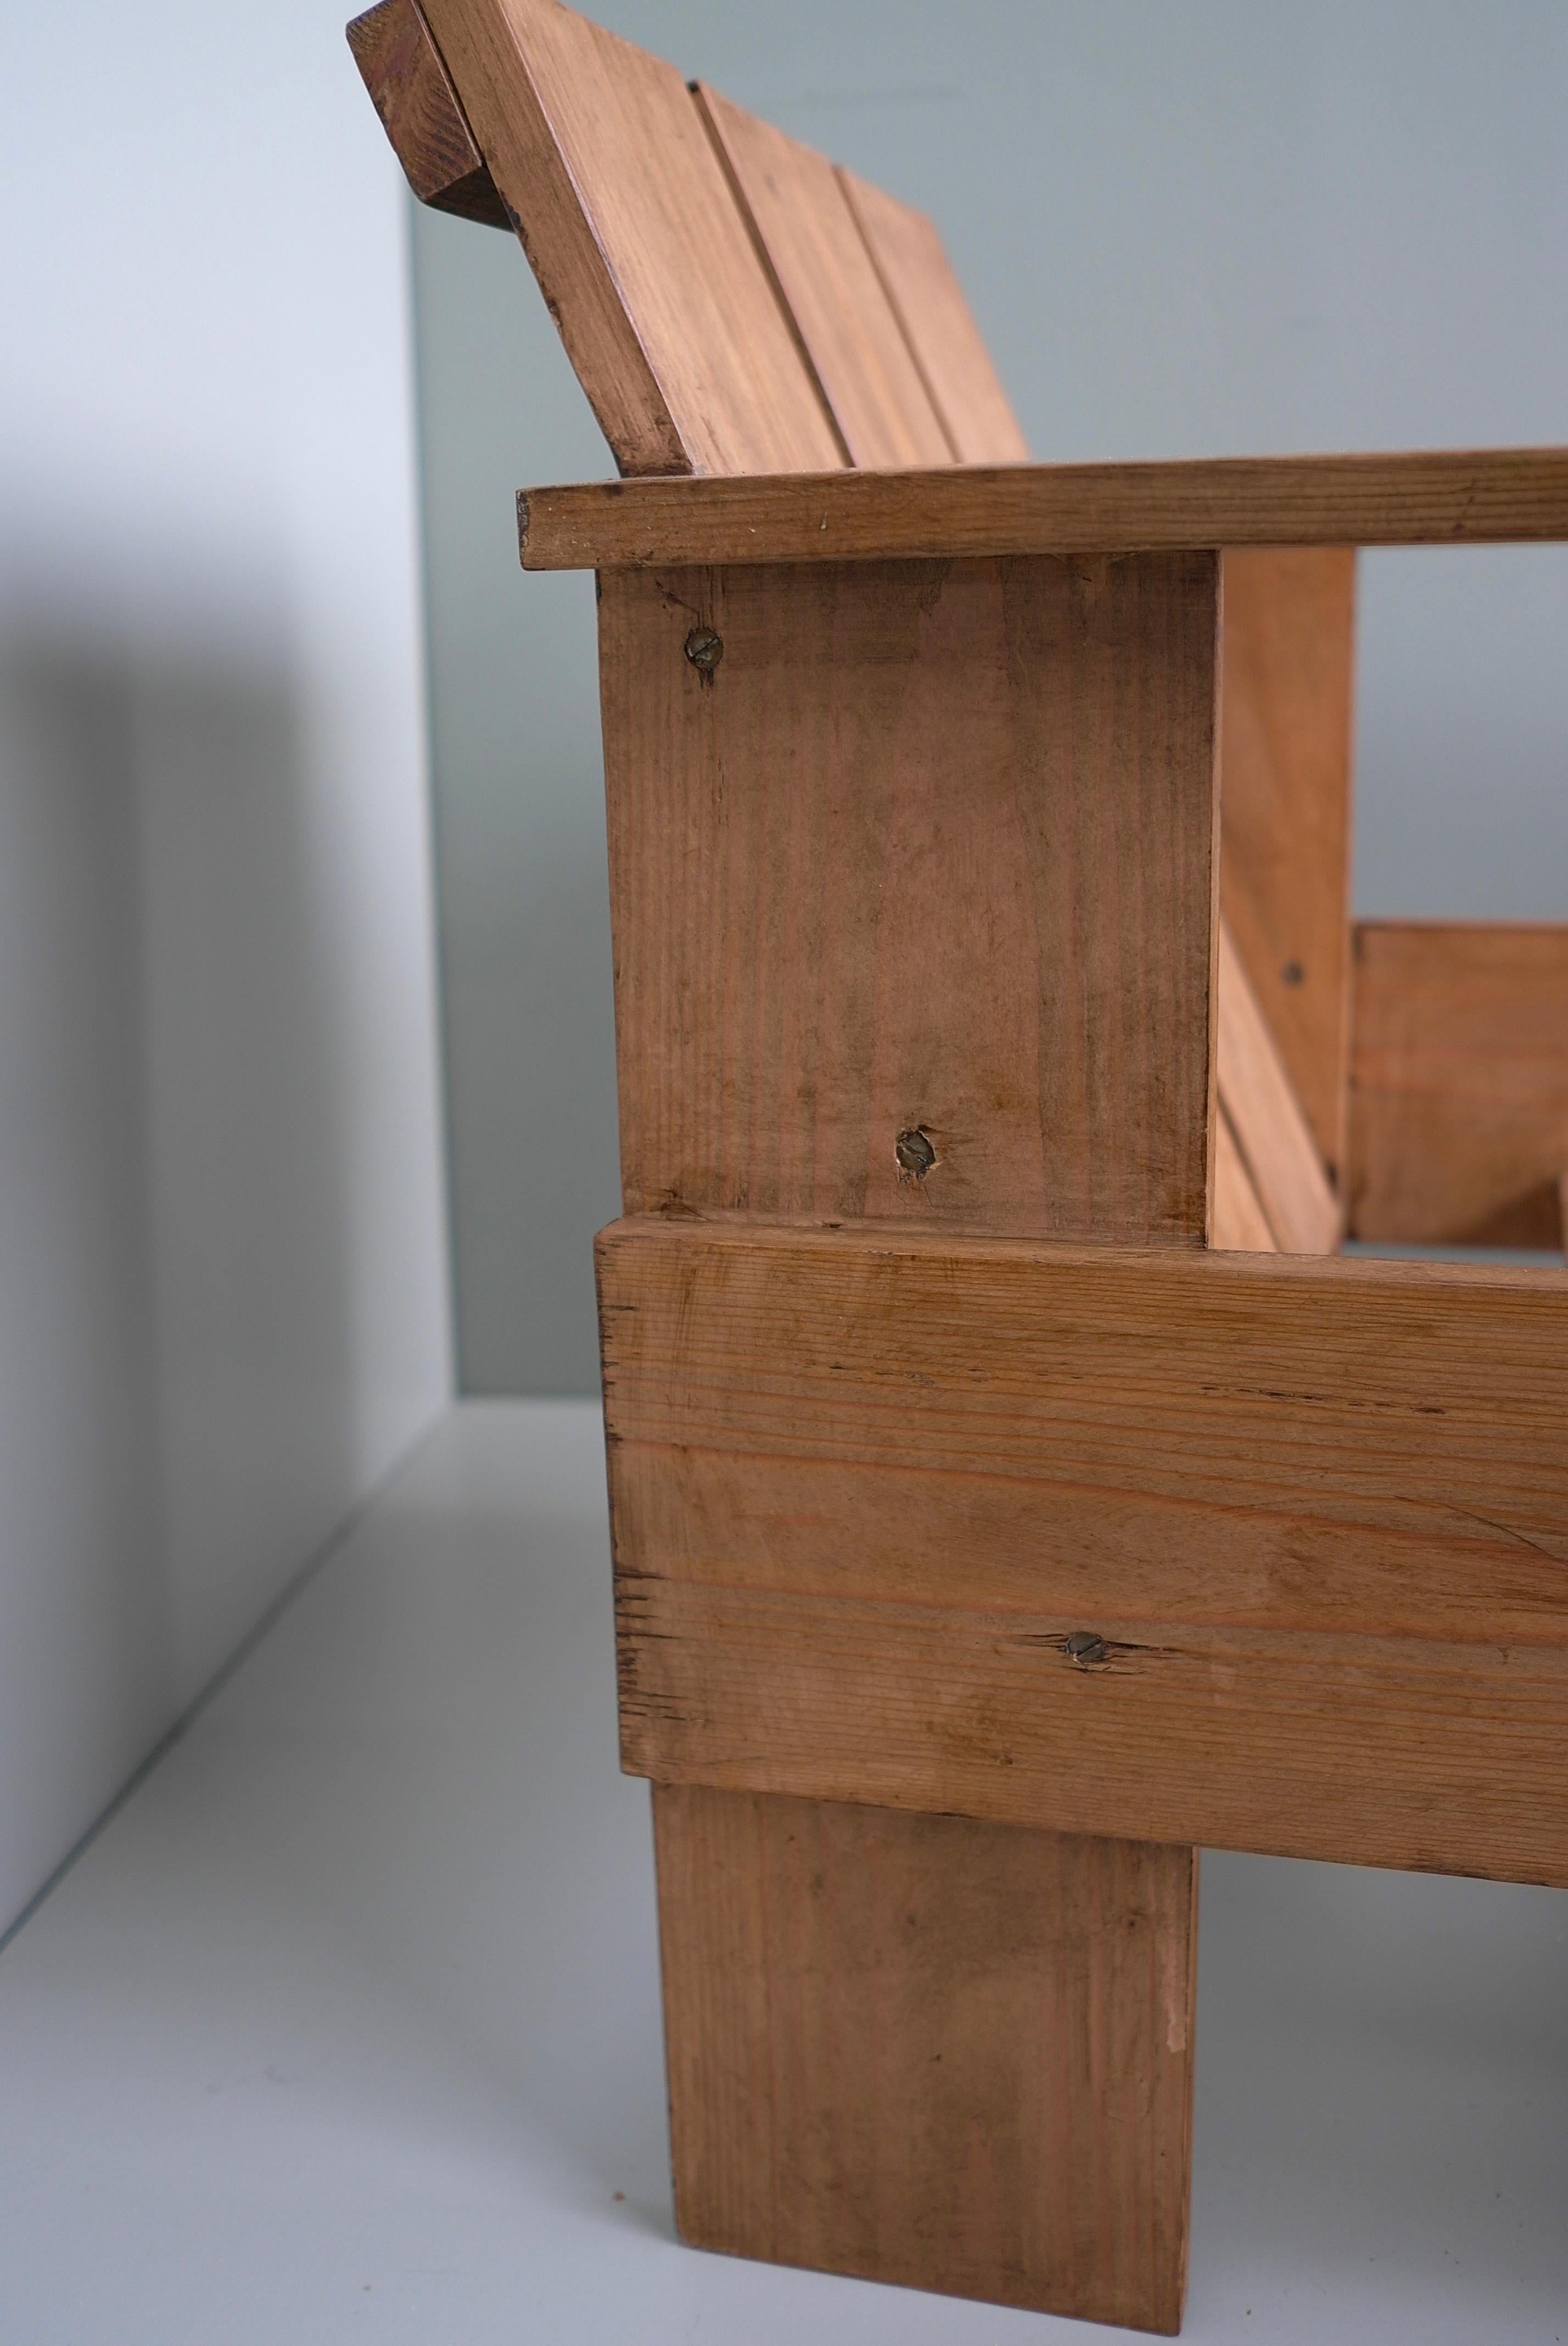 Pine Crate Chair in style of Gerrit Rietveld, The Netherlands 1960's For Sale